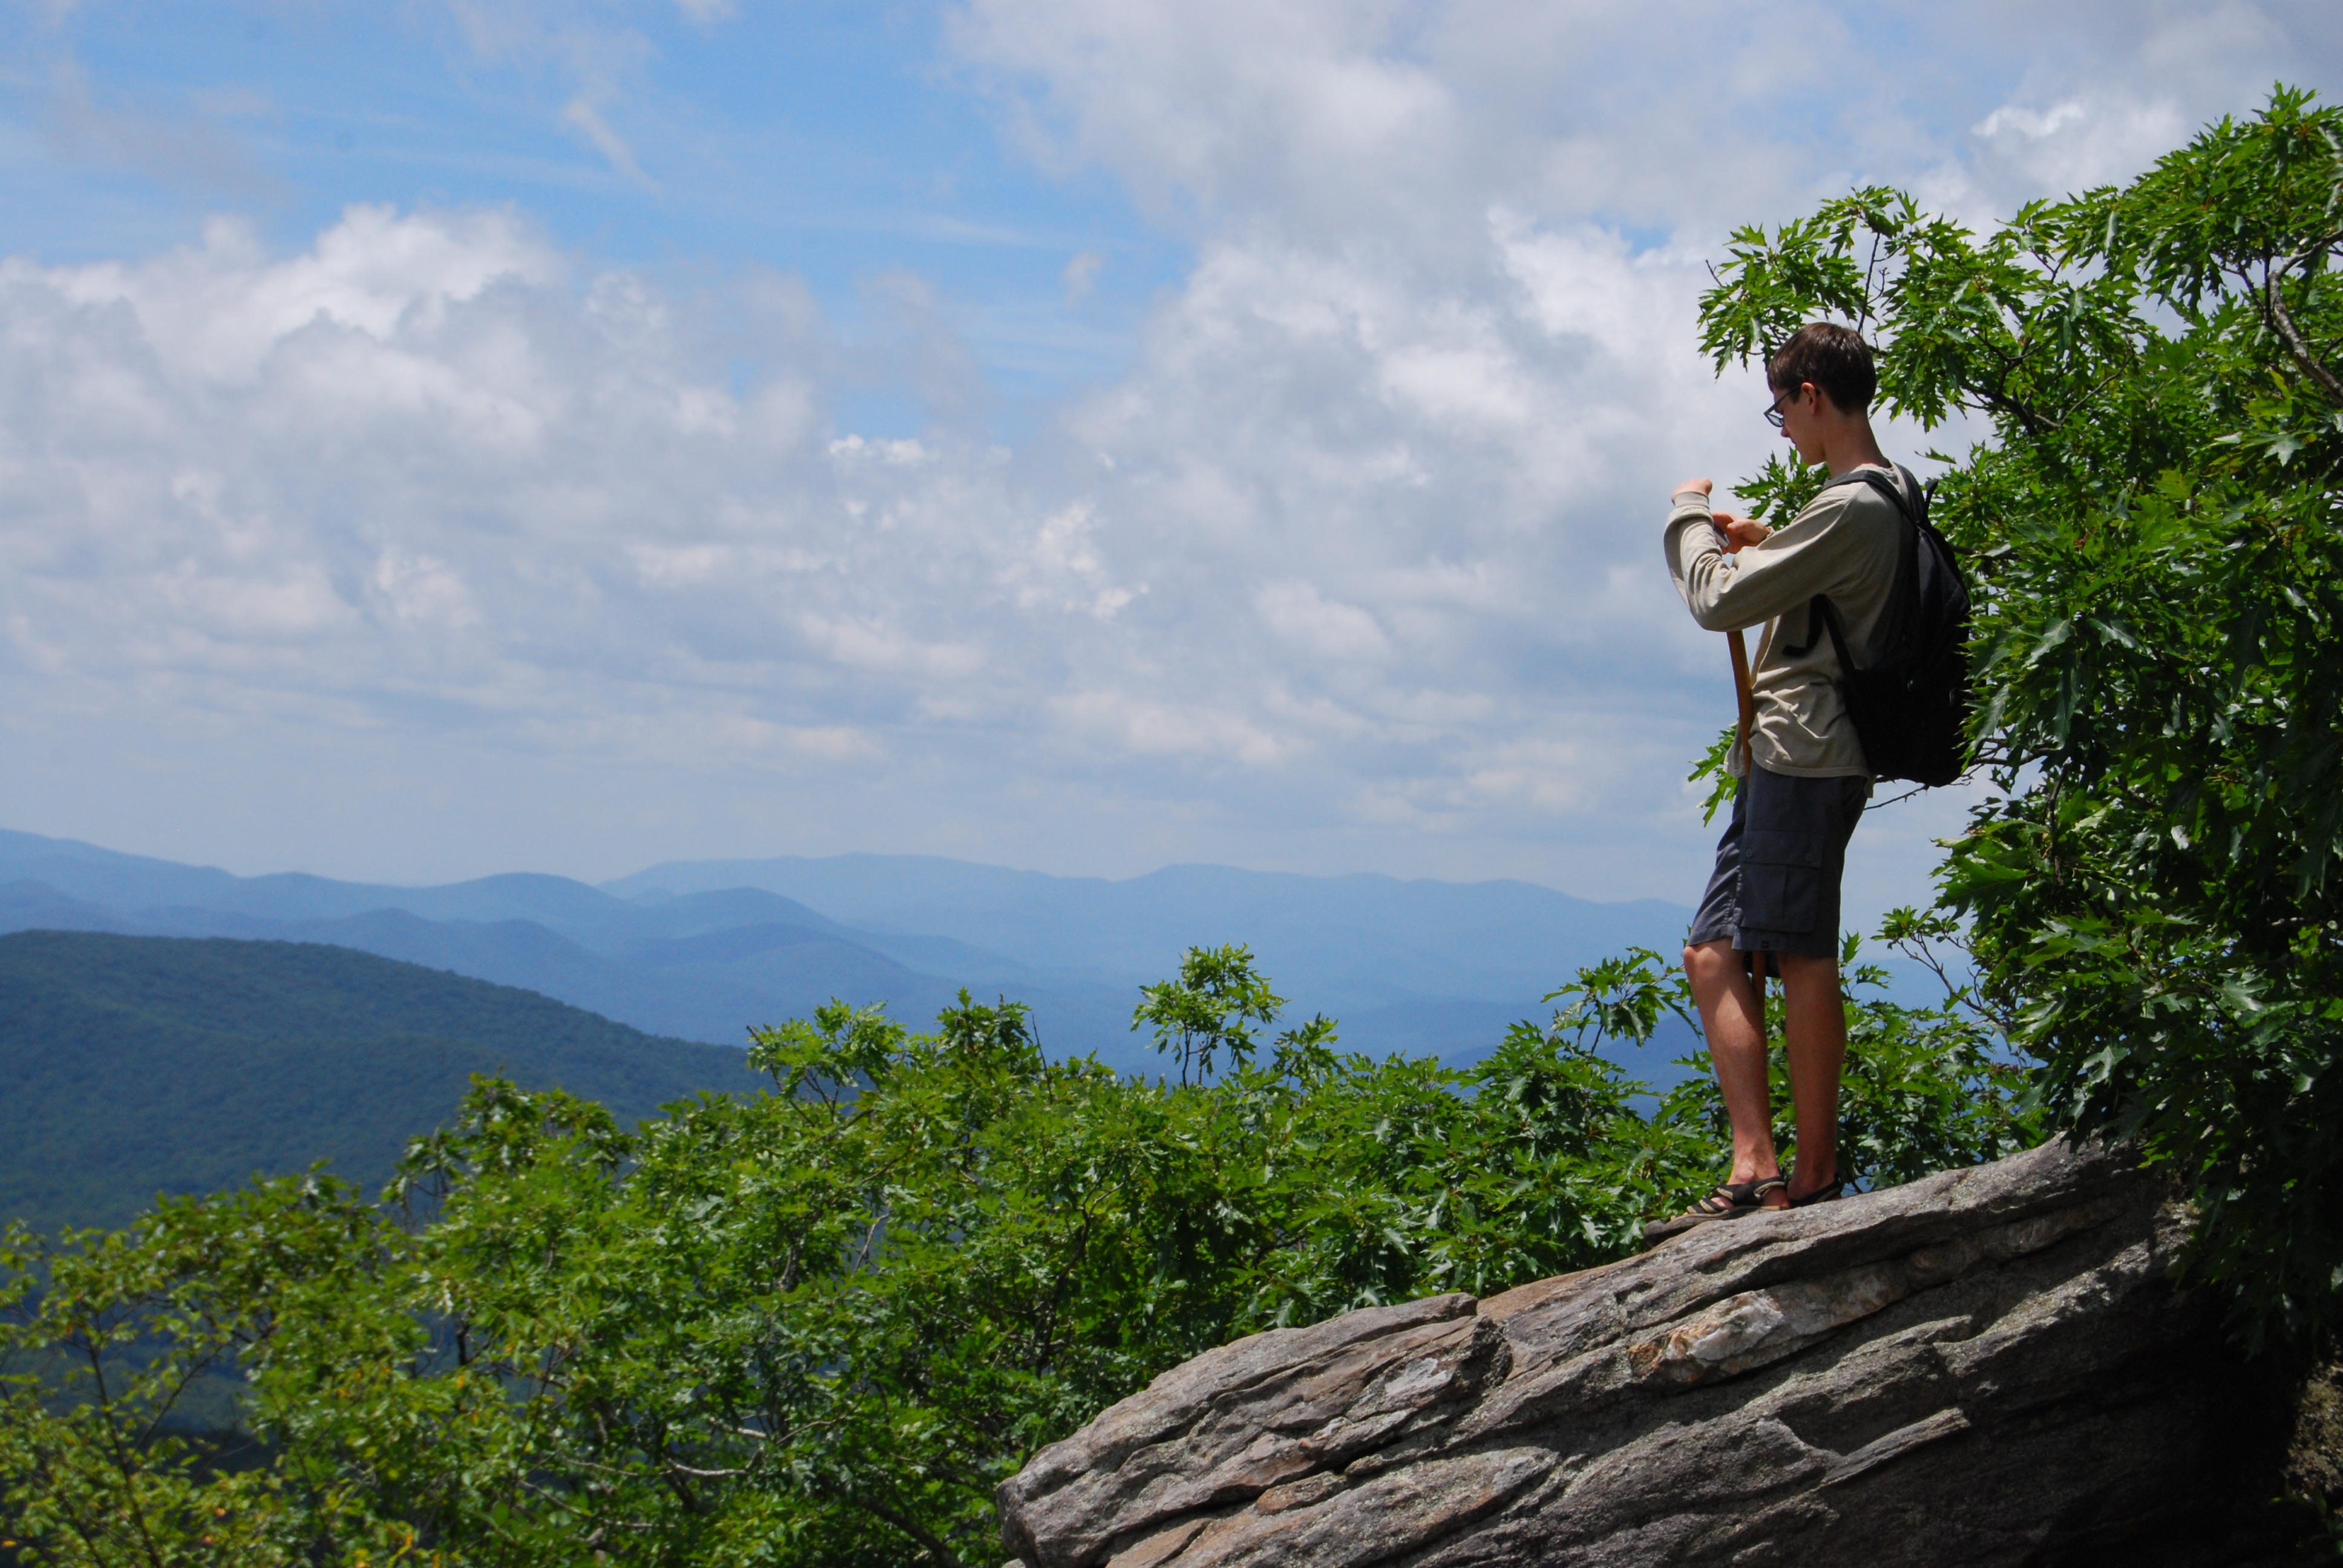 Breath-taking view from Blood Mountain